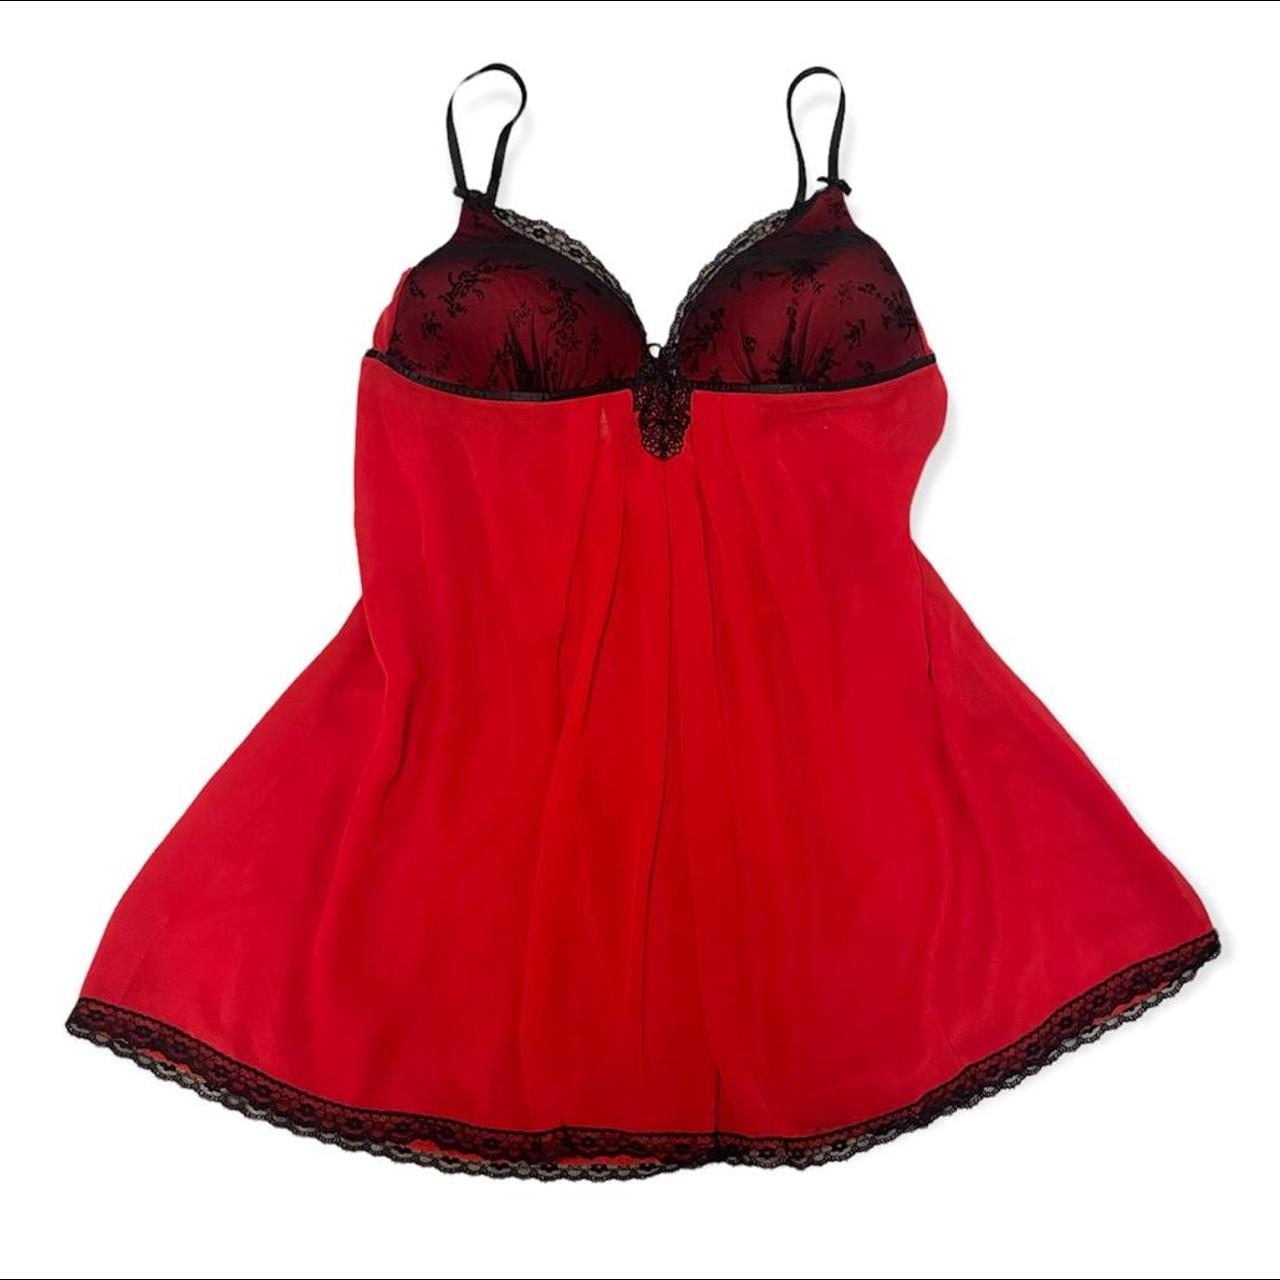 Product Image 1 - Red Sheer Babydoll Top

Vintage 90s
Size